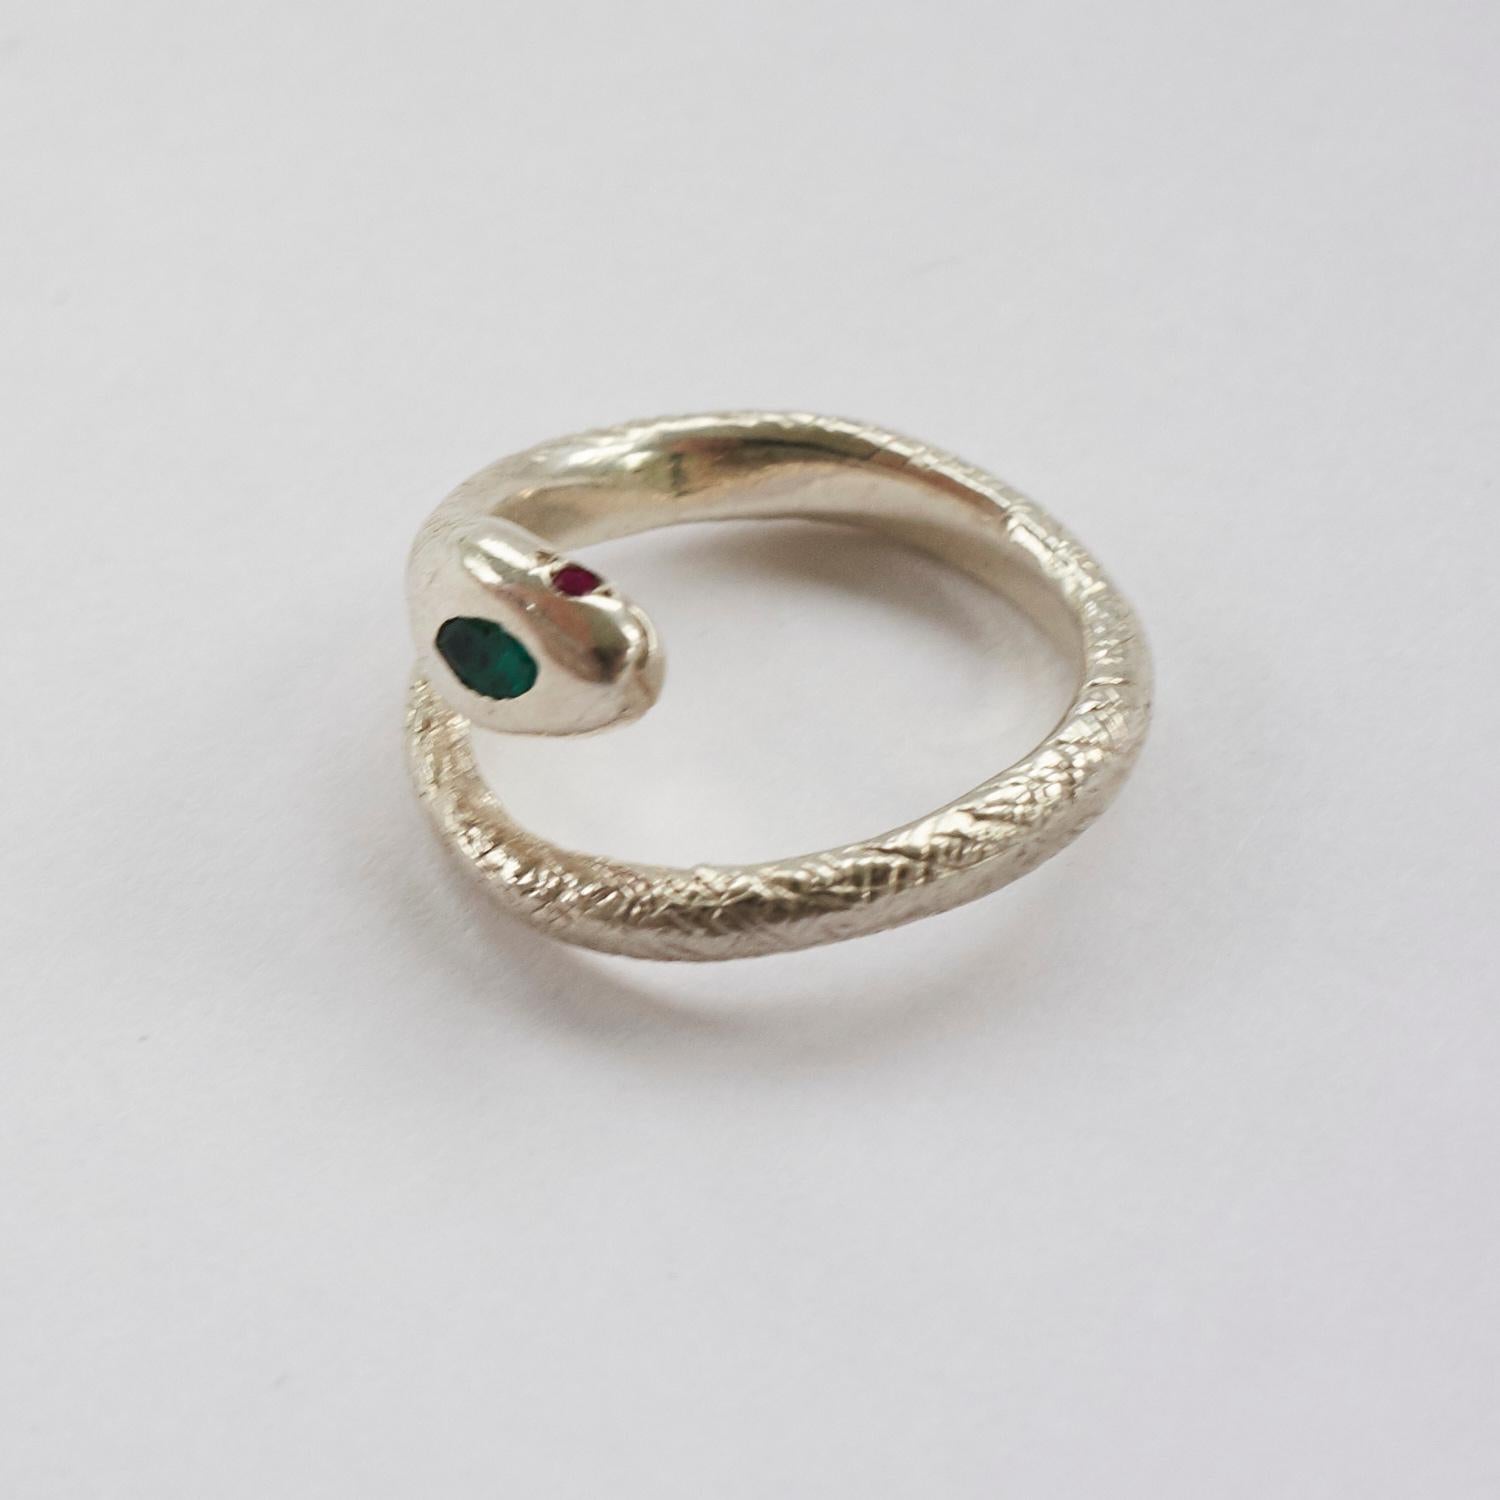 Round Cut Emerald Ruby Snake Ring Silver Onesie Victorian Cocktail Style Animal J Dauphin